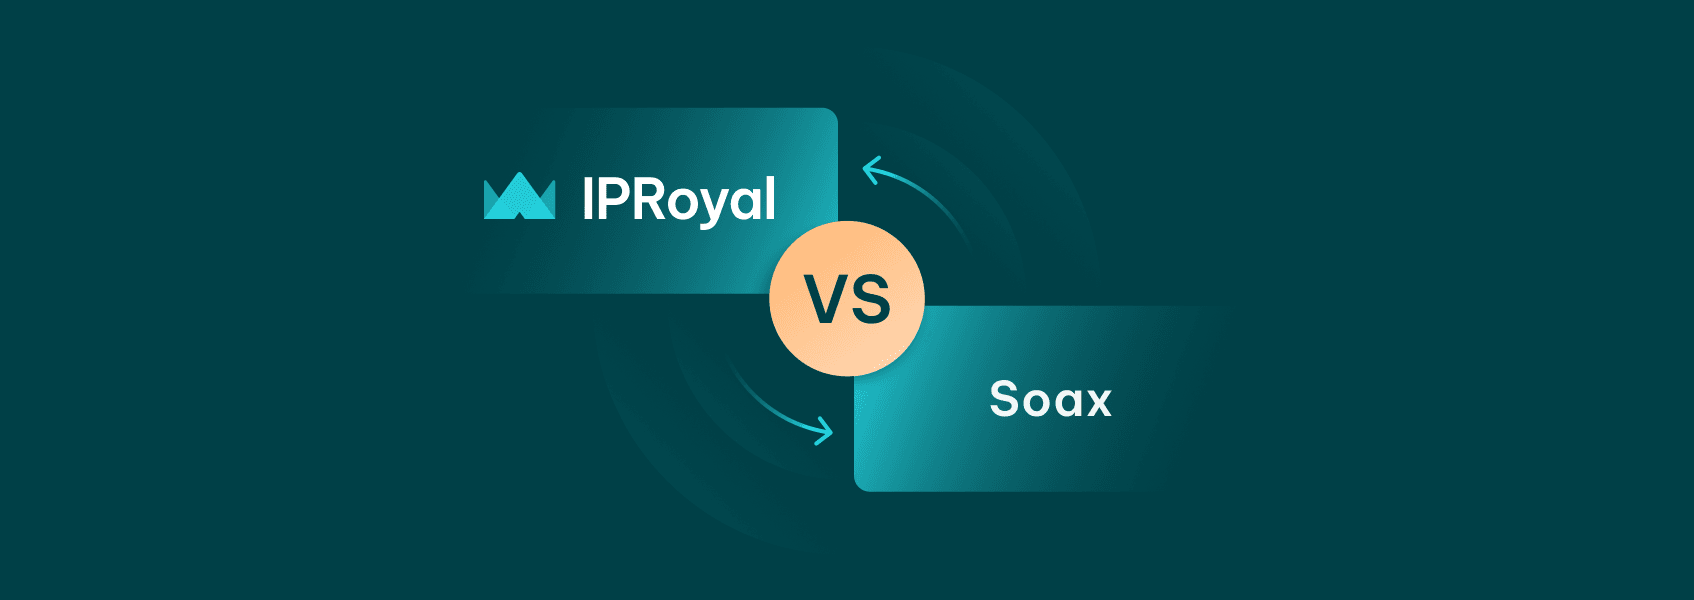 IPRoyal vs. SOAX - An In-depth Feature Comparison